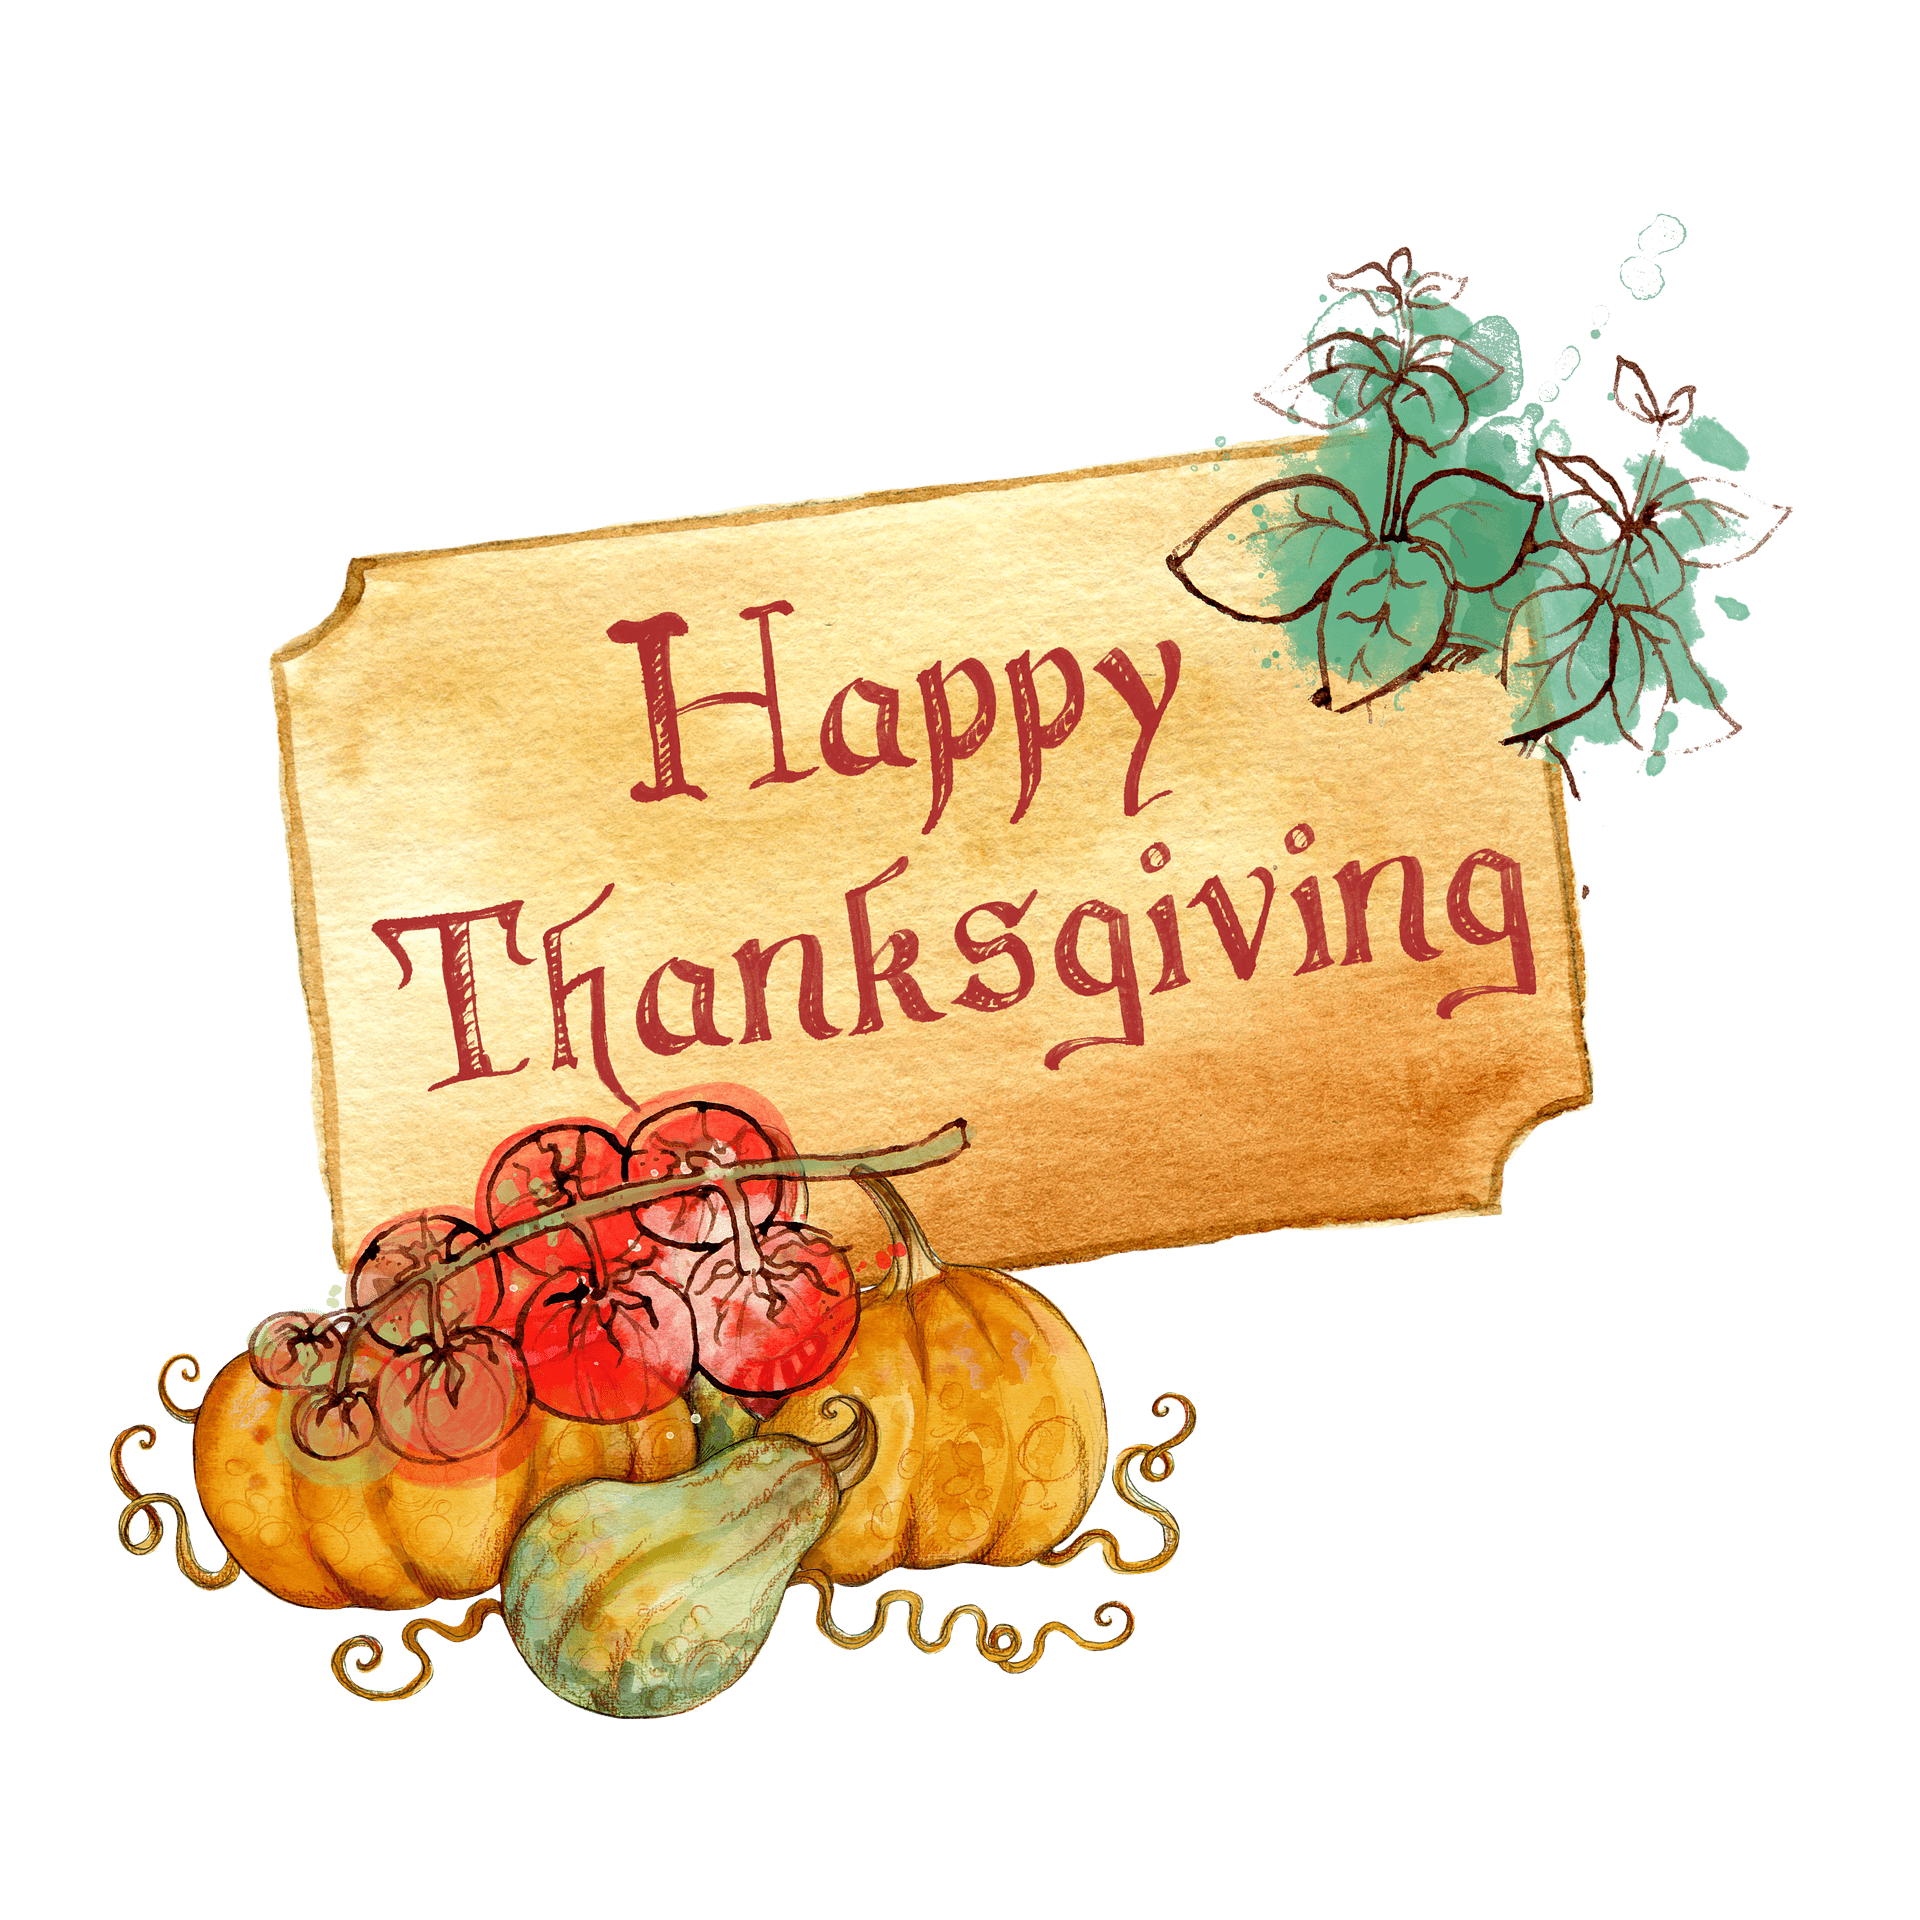 Office closed to the public in observance of Thanksgiving Day